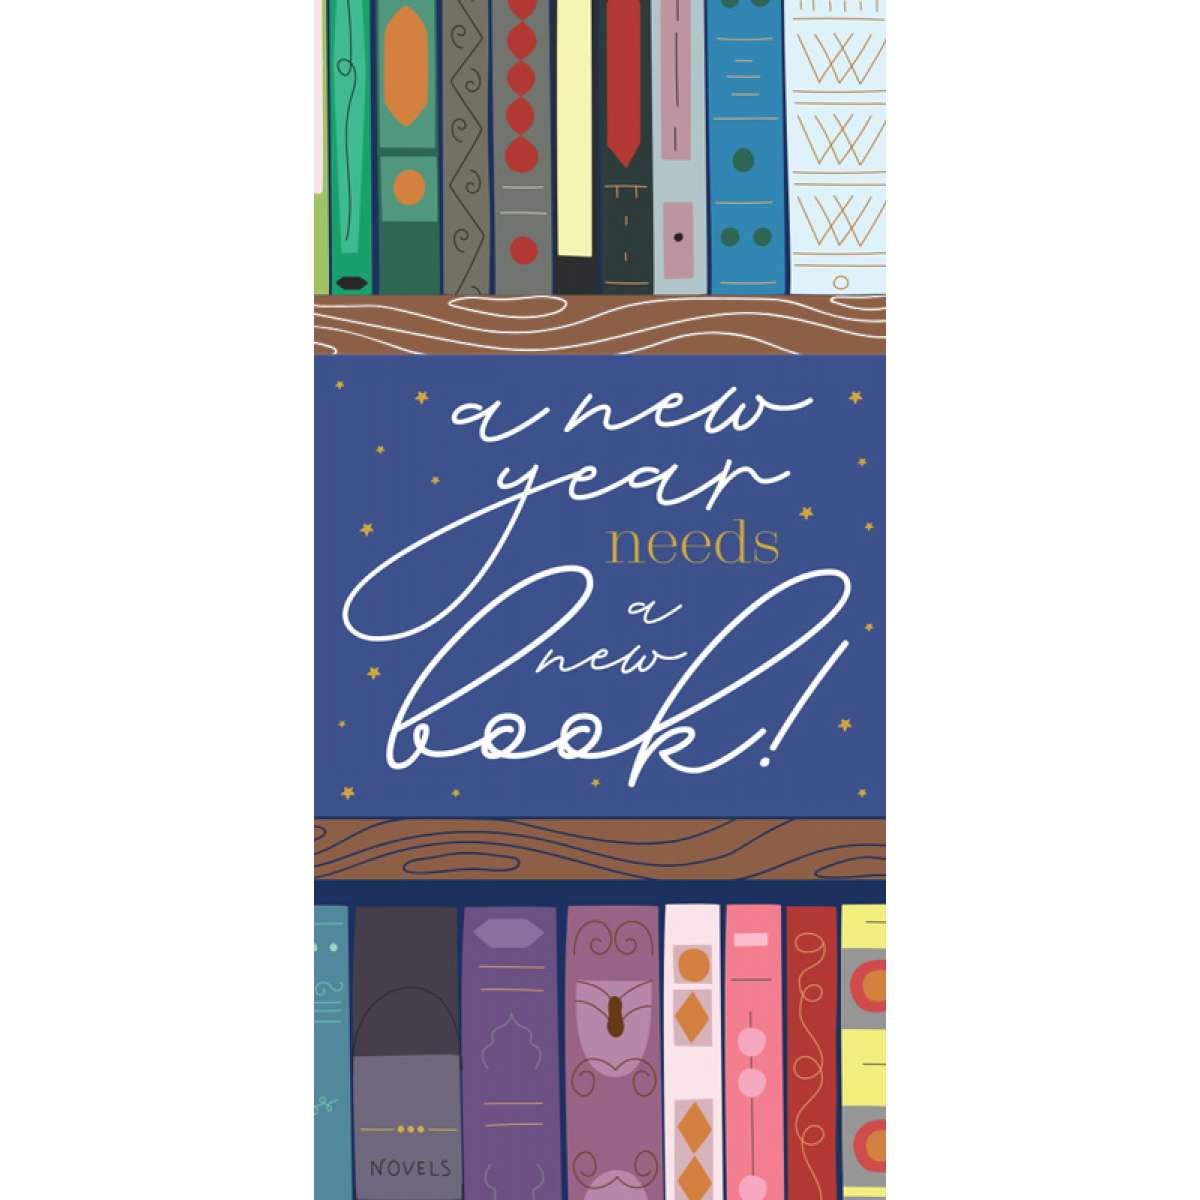 BOOKMARKER VB051 - A NEW YEAR NEEDS A NEW BOOK! 